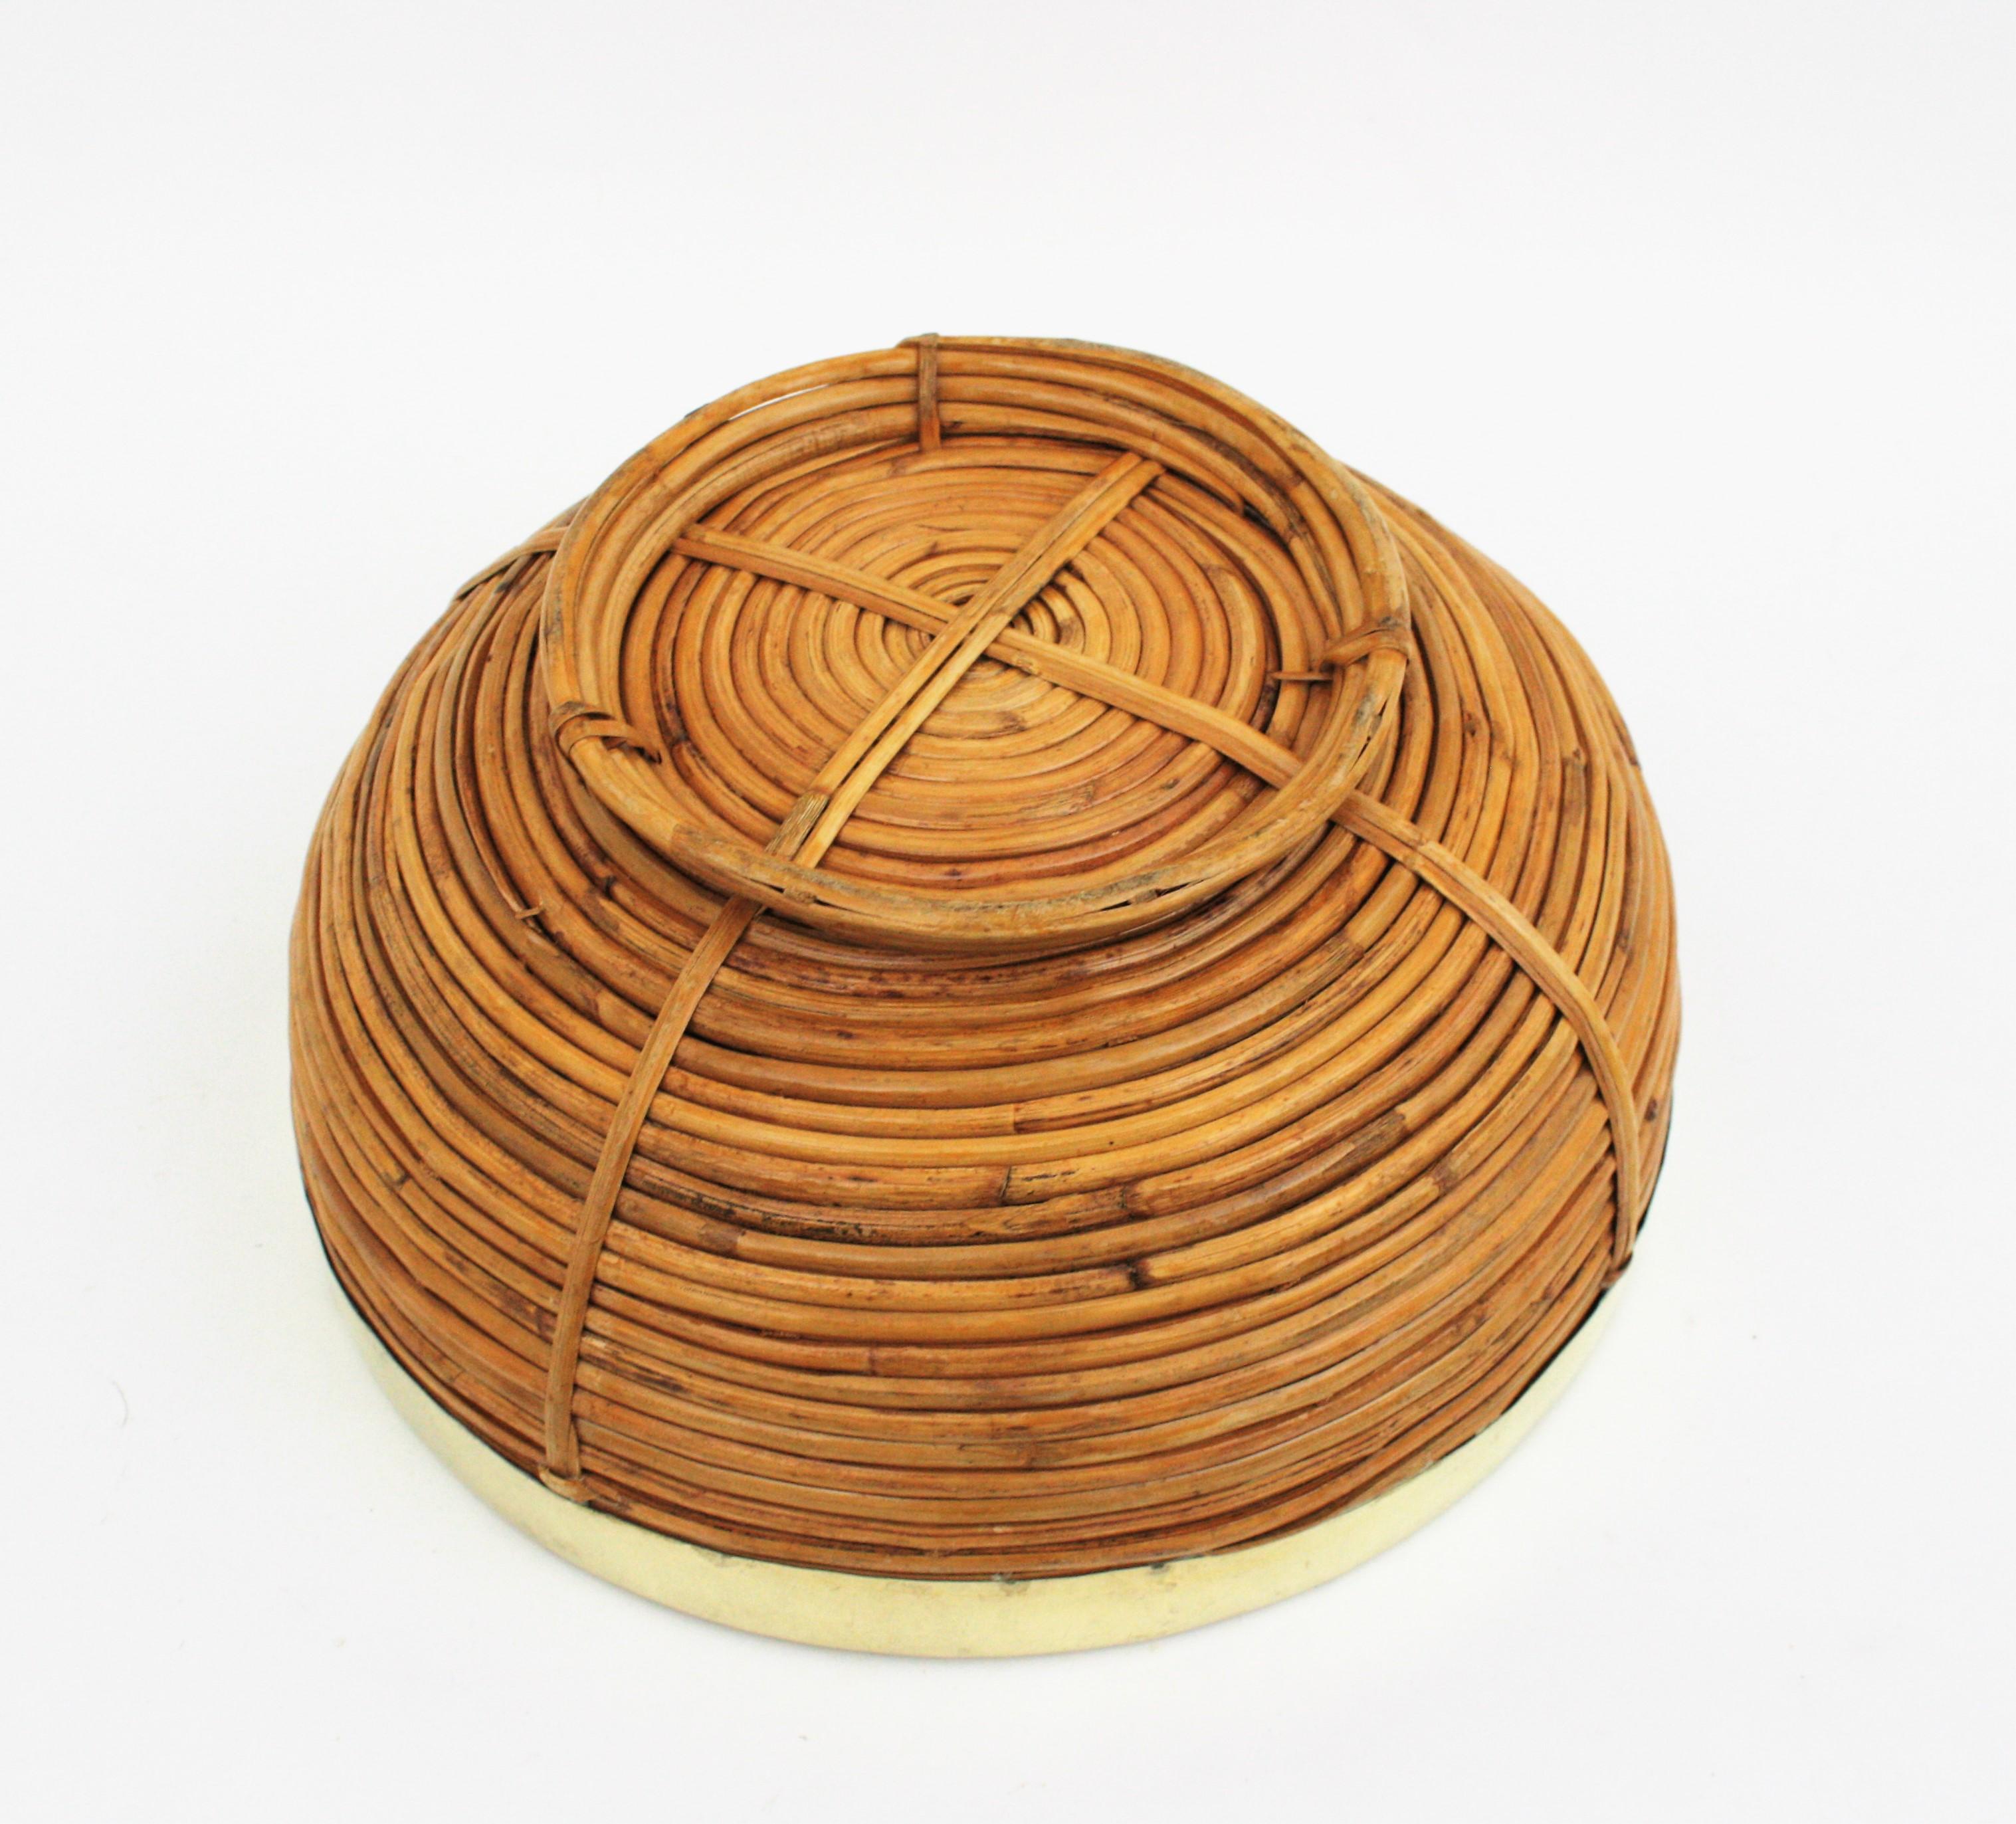 Rattan and Brass Italian Large Basket Bowl Centerpiece, 1970s For Sale 8